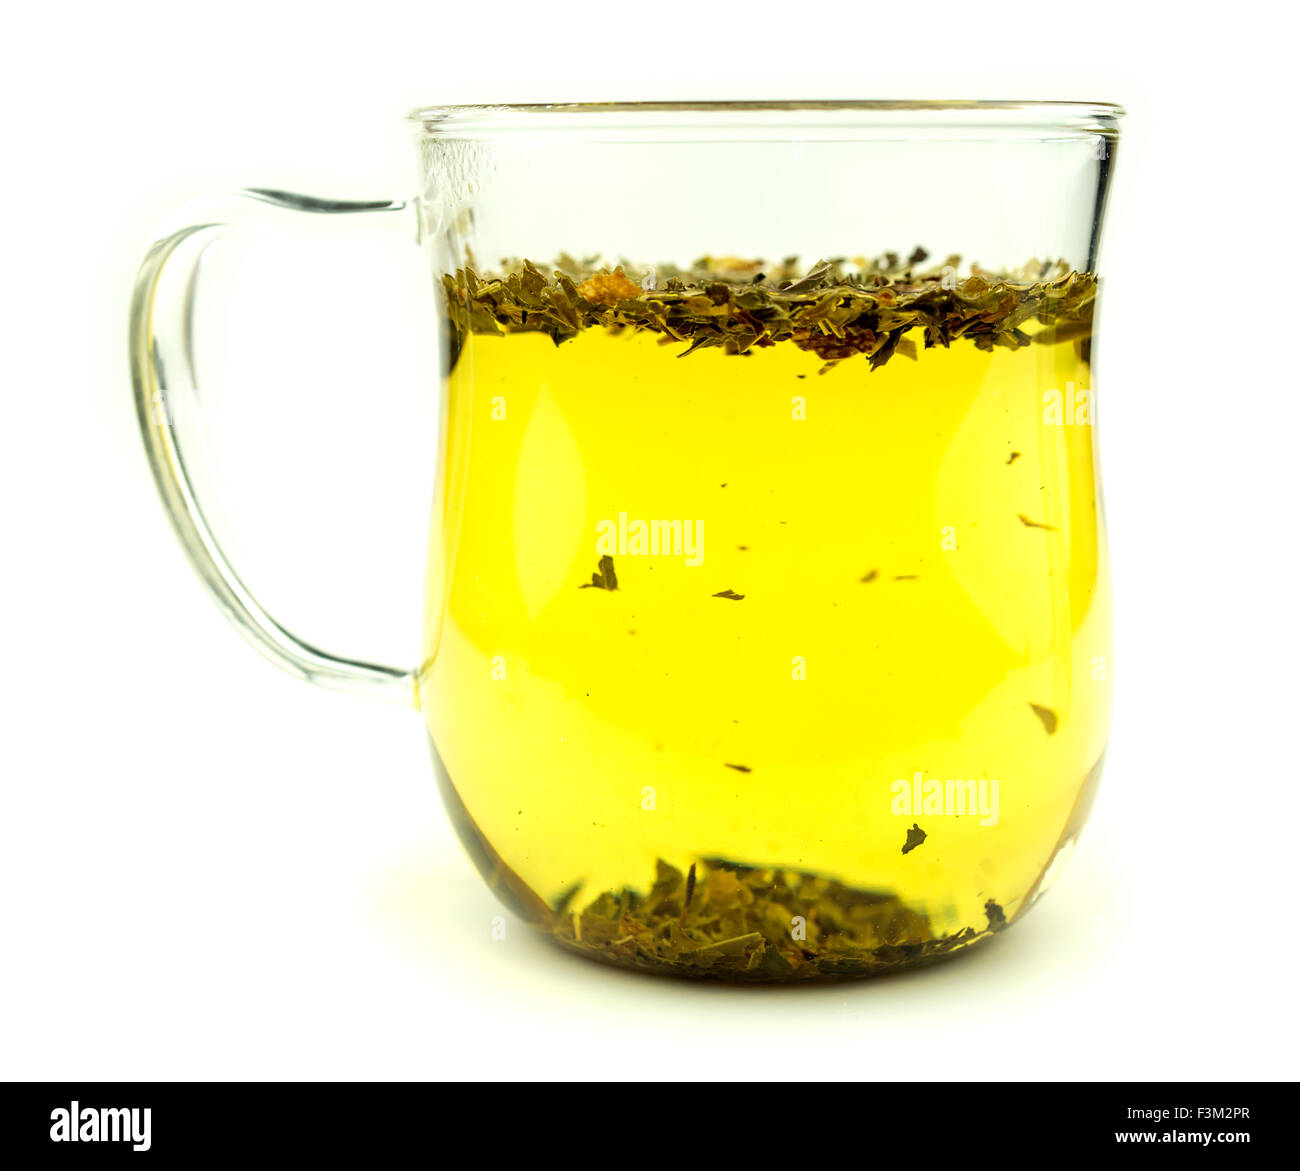 Tasty healthy green tea in a cup Stock Photo